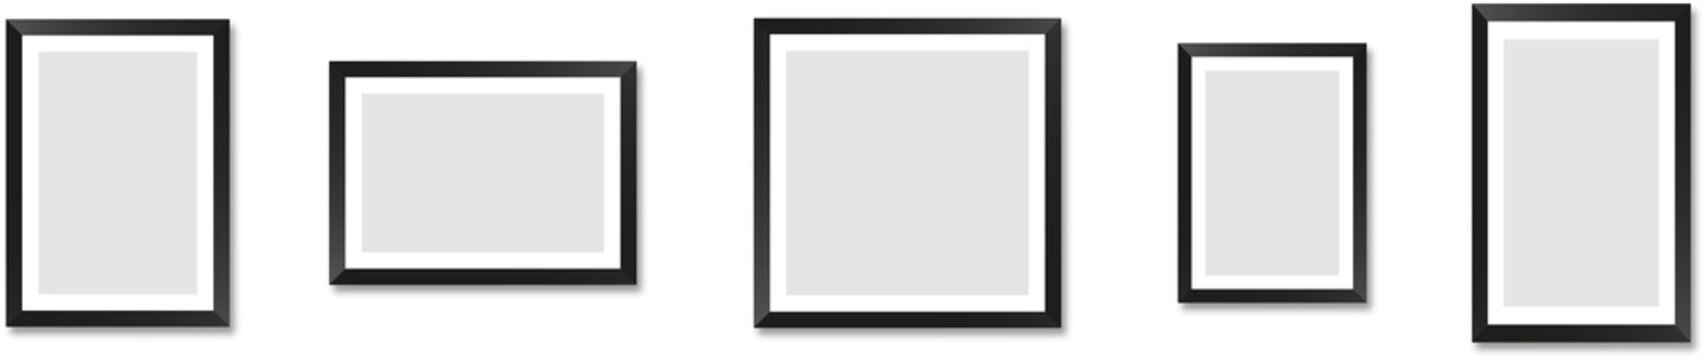 Realistic picture frame mockup rectangle, square collection. Blank frame border mockups. Isolated Black and white pictures frames mock-up on transparent background. PNG image